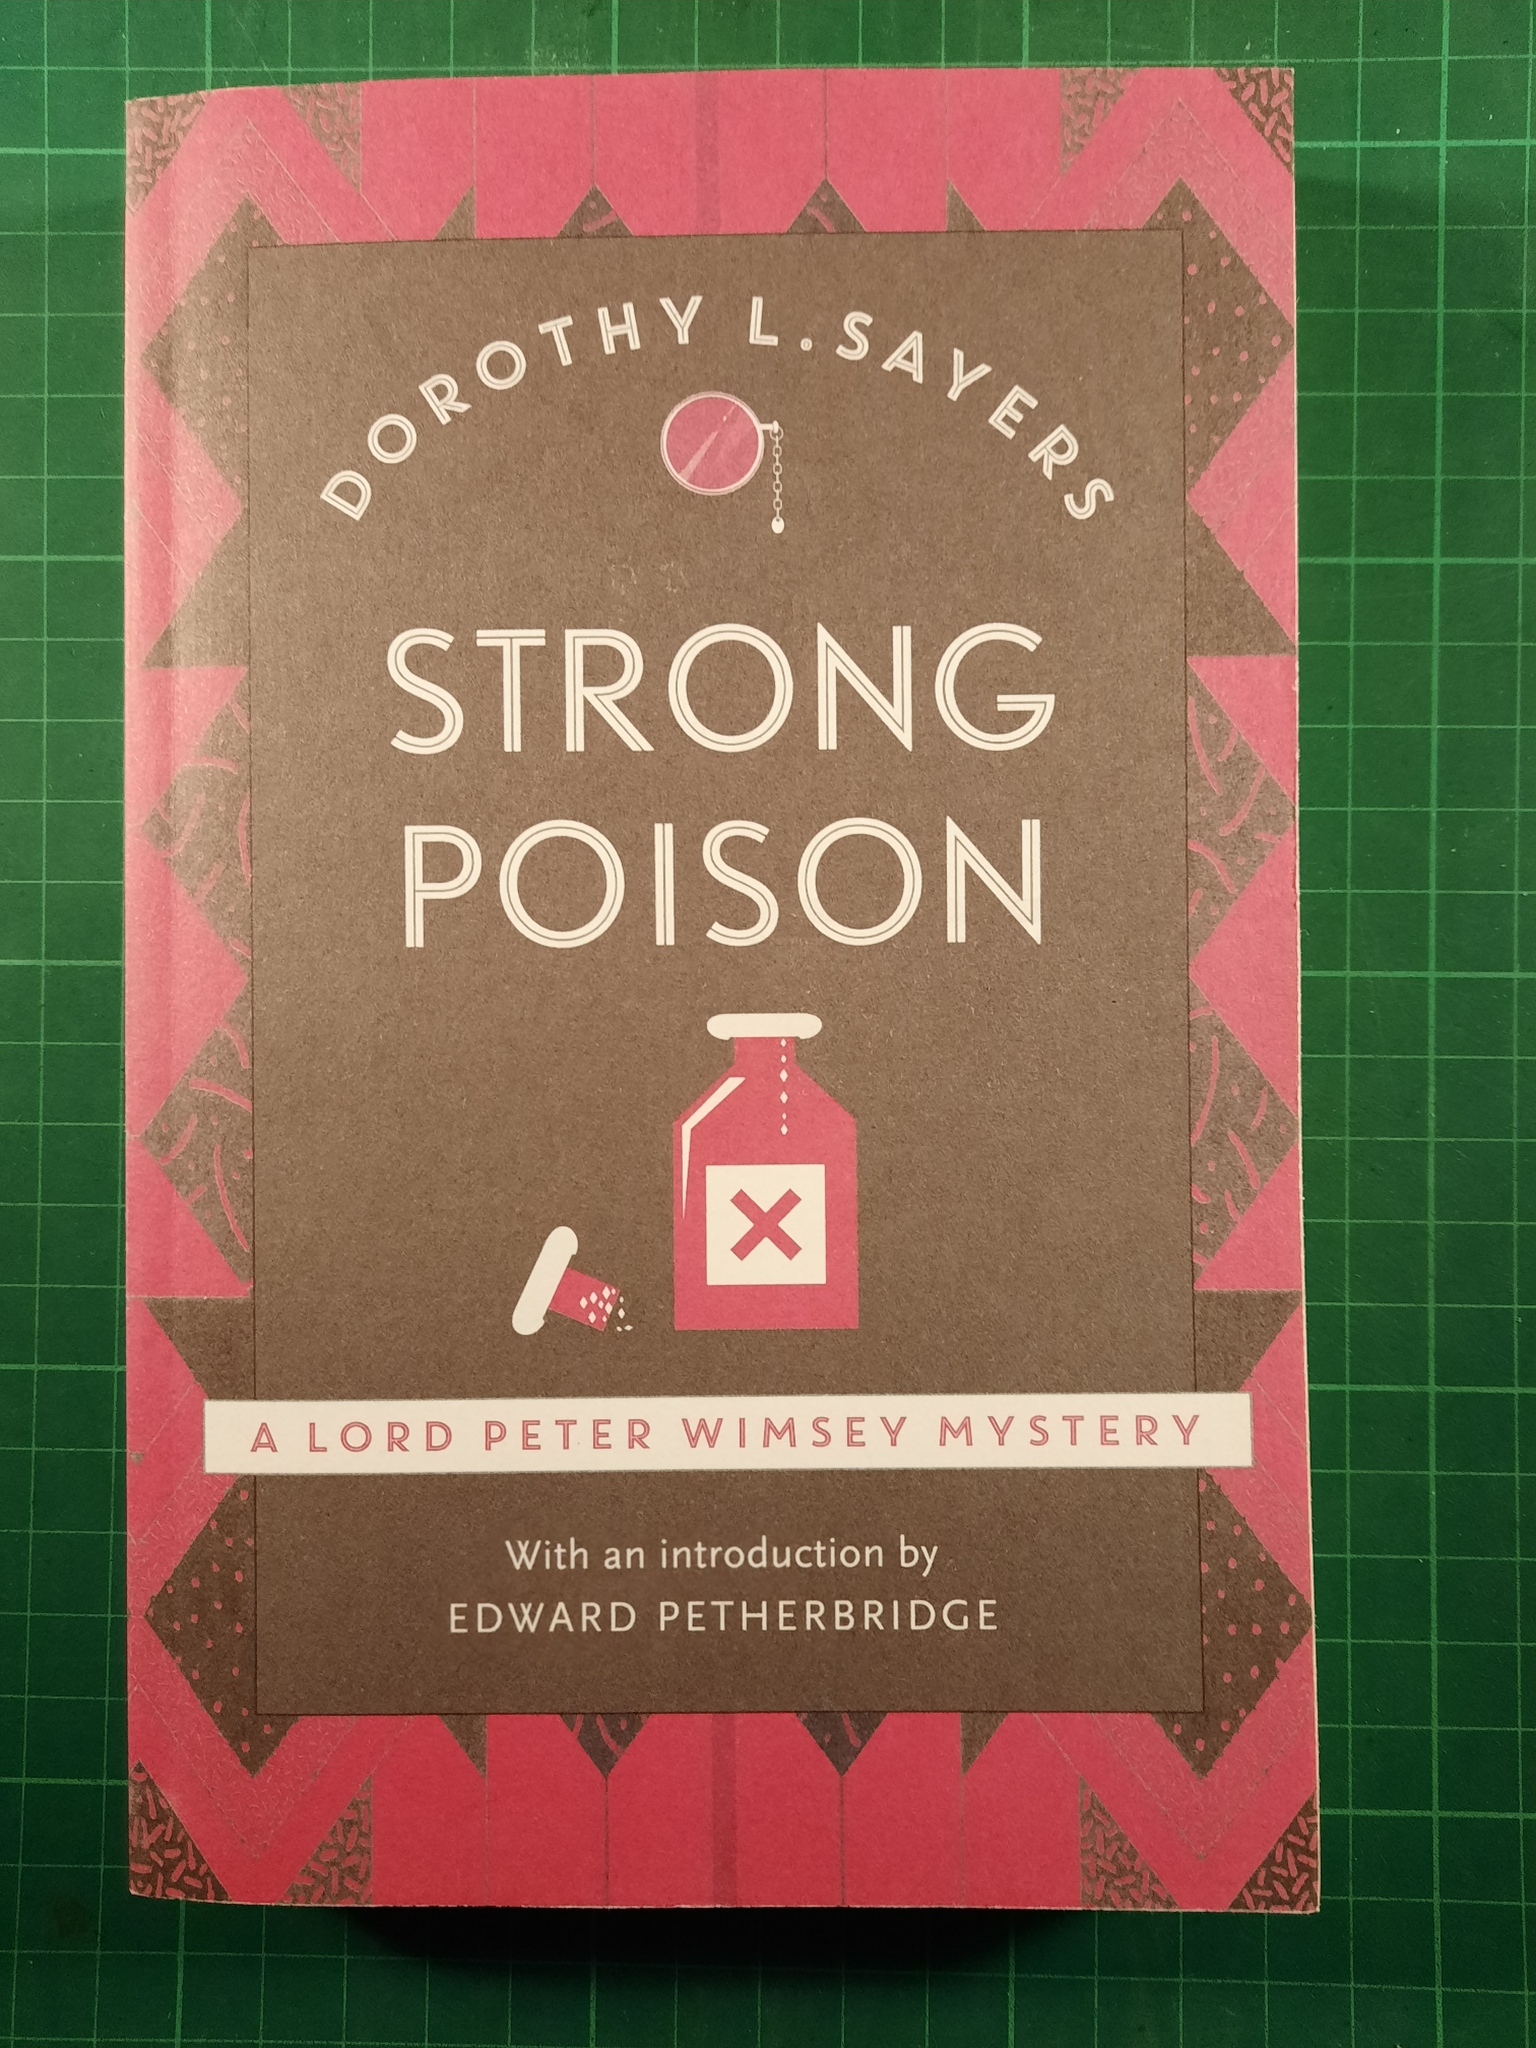 Dorothy L. Sayers : Strong poison